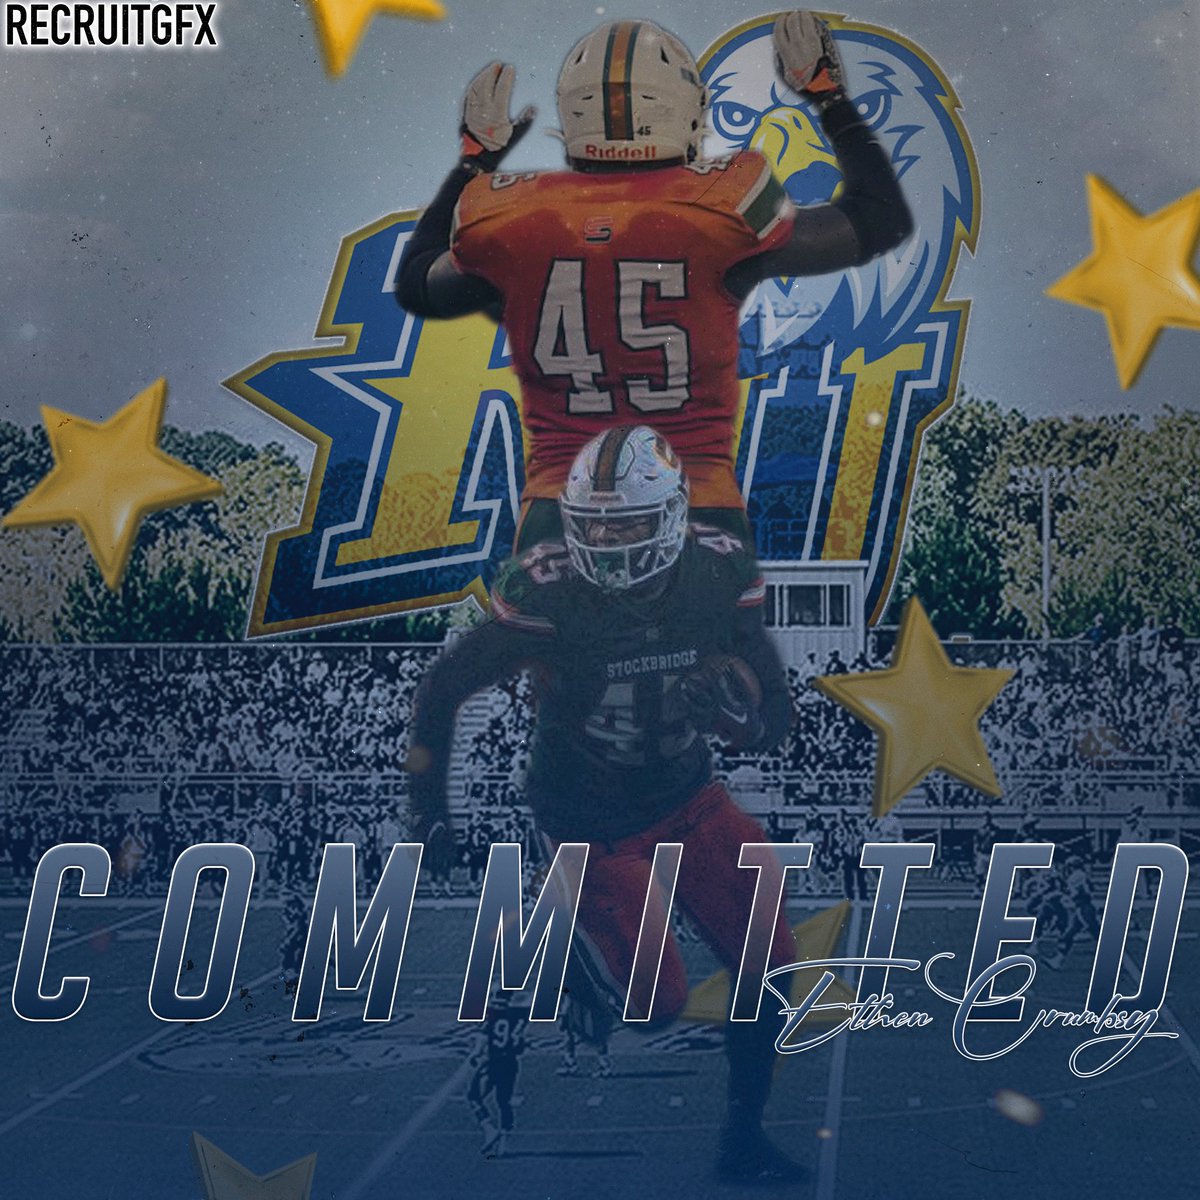 I want to thank my Coaches Teammates and my mom for keeping me motivated when things got hard but it’s safe to say I am officially signed and taking my talents to Reinhardt University GO EAGLES 🔵🟡 @StockbridgeFoo2 @StockbridgeHFC @SHS_HCS @CoachHennes @CoachBailey62 @CoachDUBB_